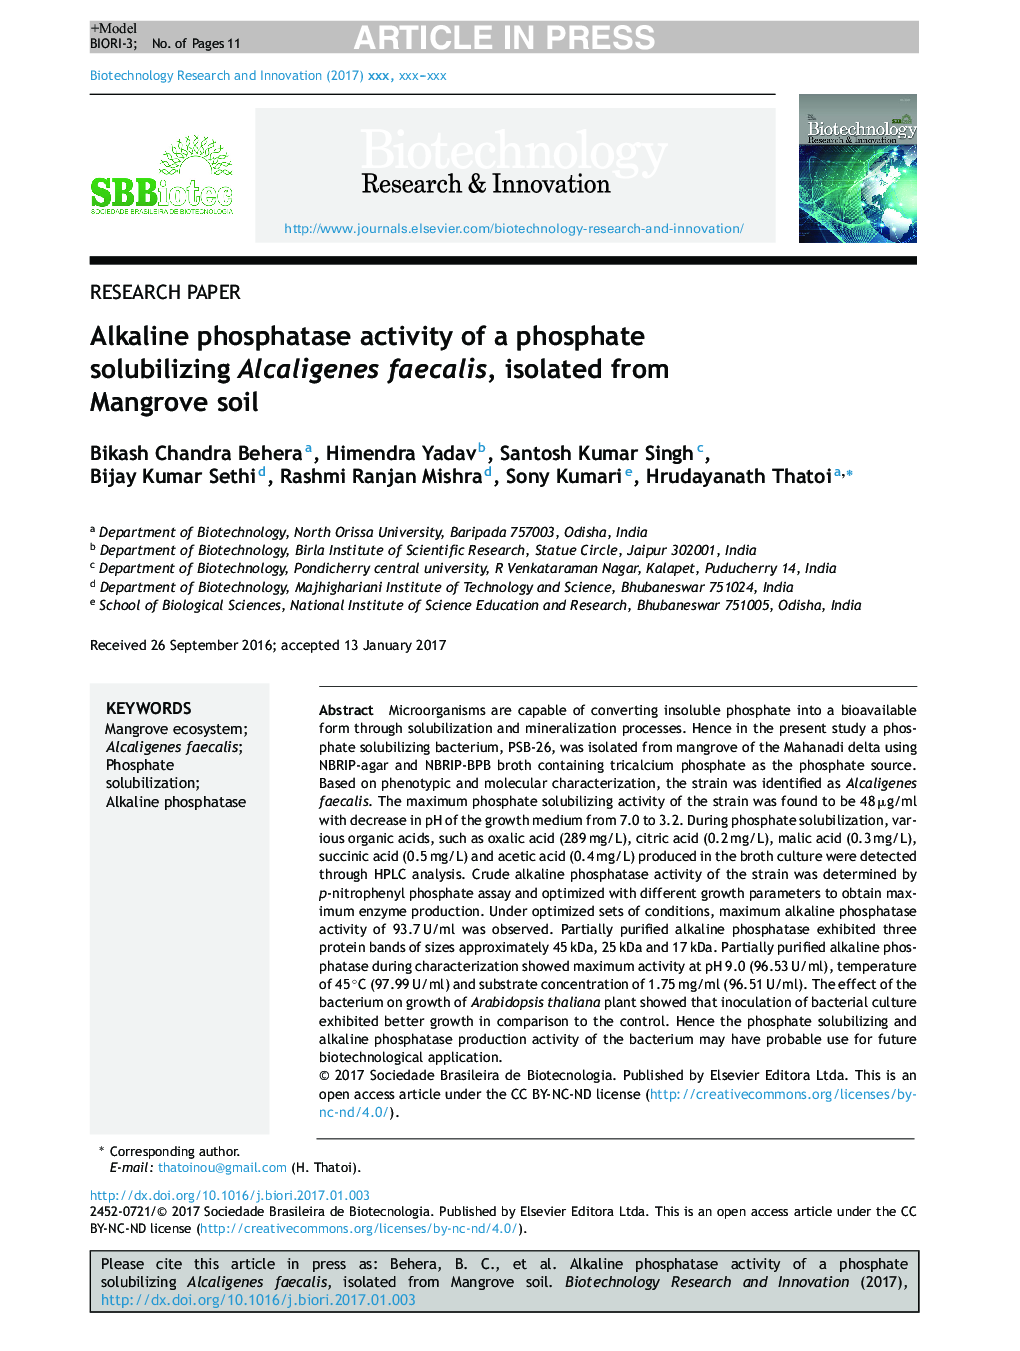 Alkaline phosphatase activity of a phosphate solubilizing Alcaligenes faecalis, isolated from Mangrove soil